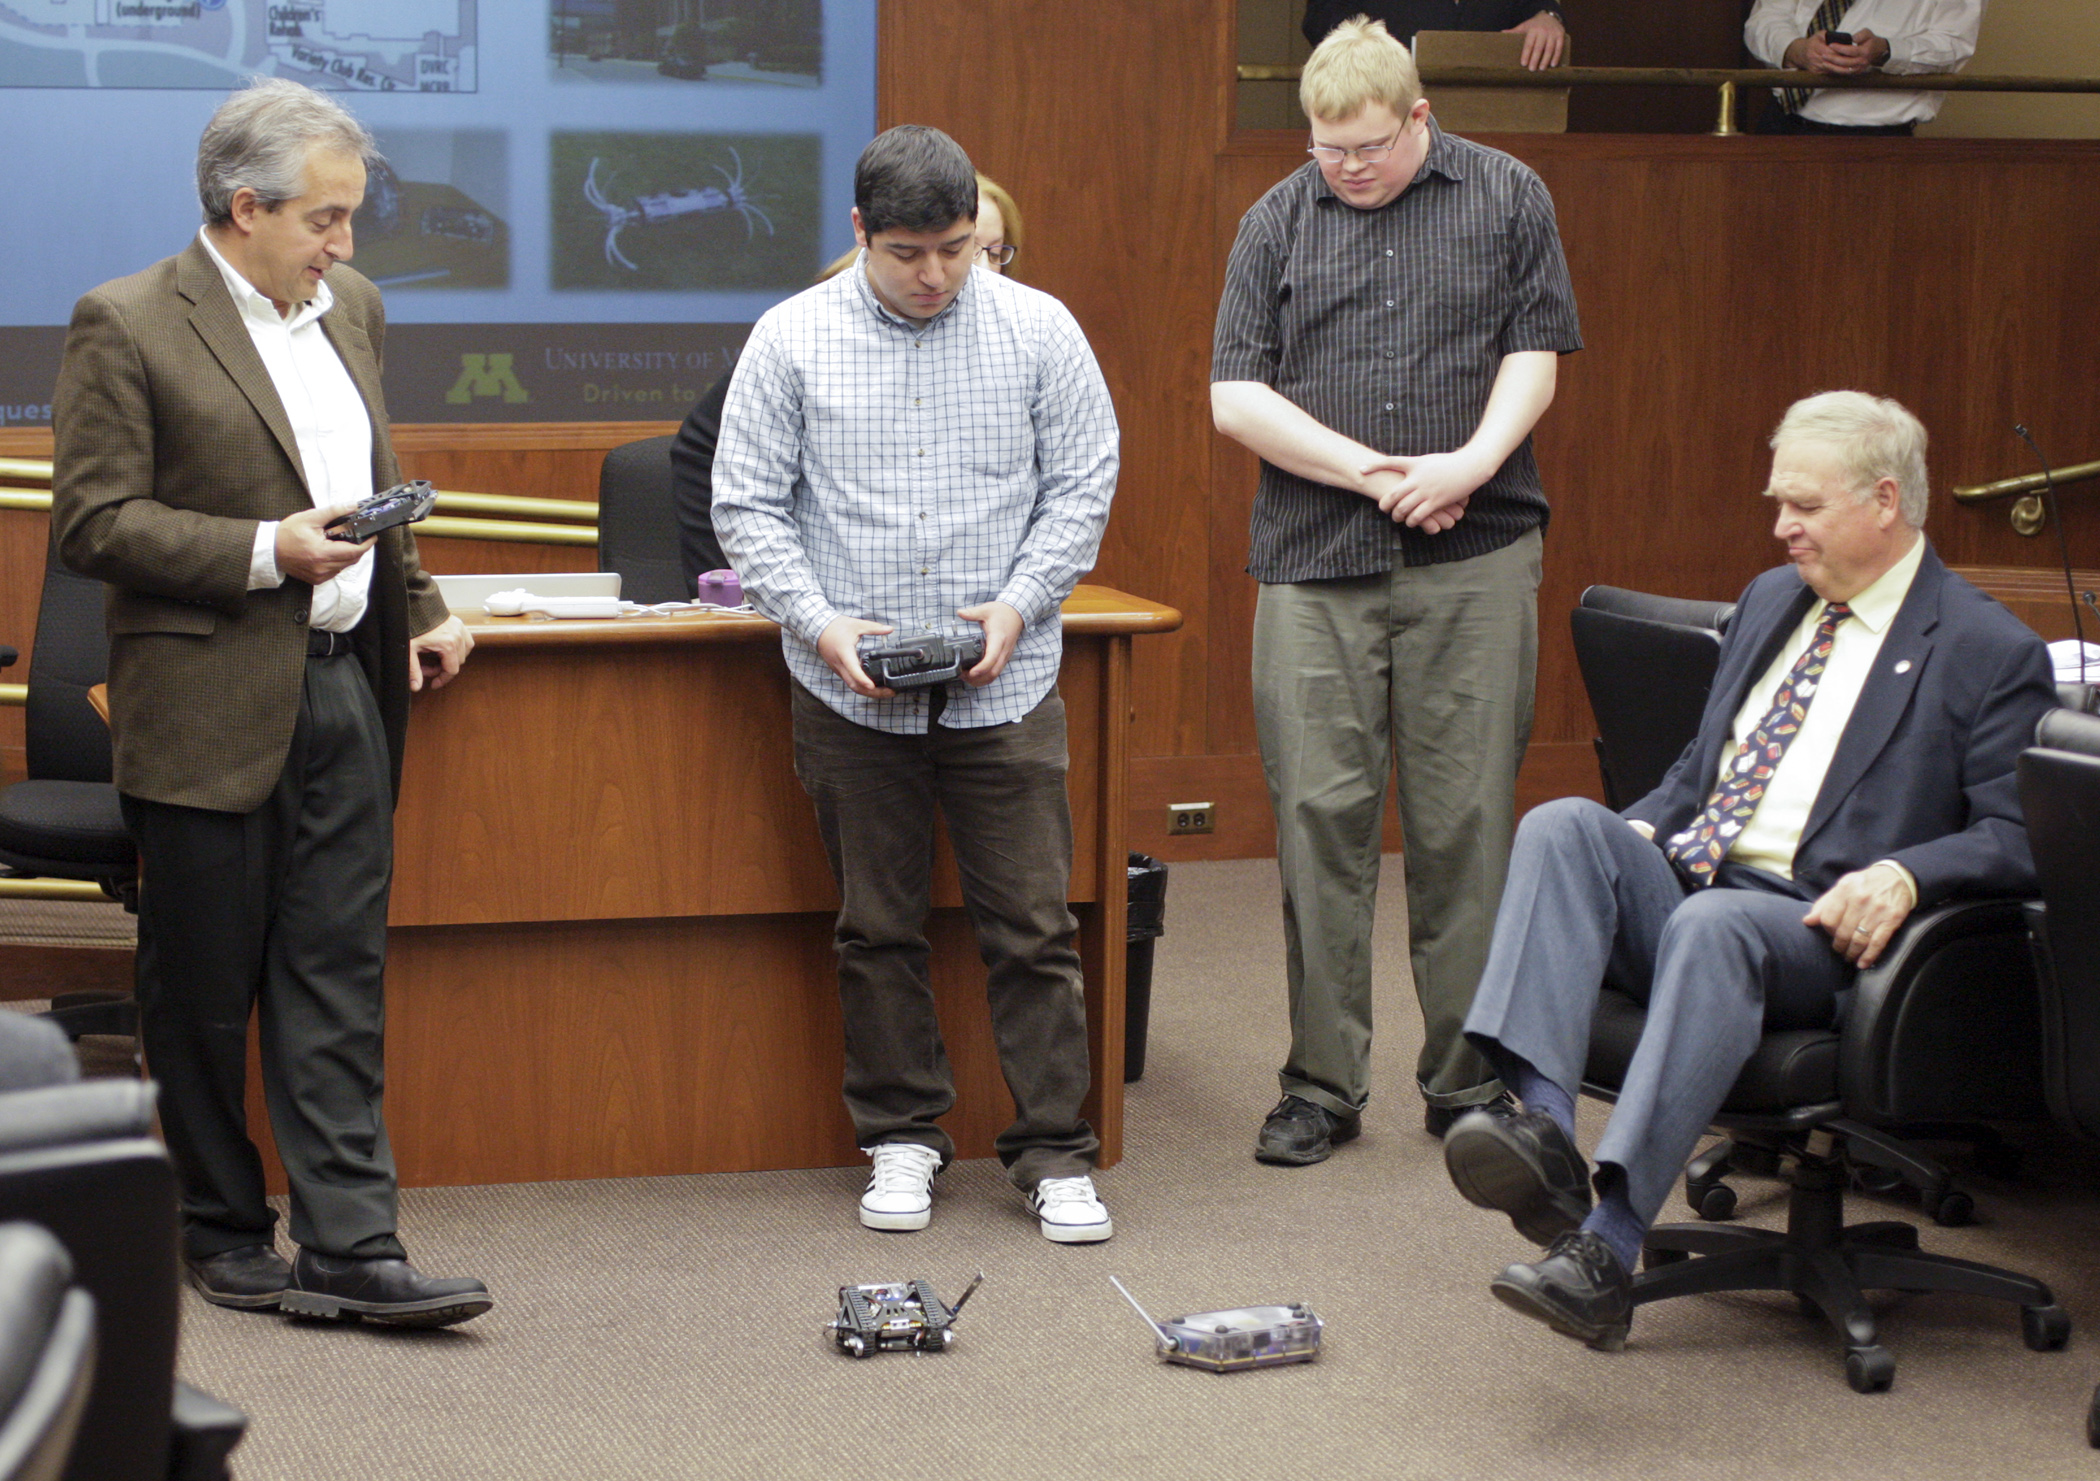 Rep. Dean Urdahl, seated, makes way for a robot being demonstrated by University of Minnesota robotics graduate student Dario Canelon during a Jan. 22 overview of the university’s bonding request before the House Capital Investment Committee. Also pictured are Dr. Nikos Papanikolopoulos, left, director of the university’s Center for Distributed Robotics, and Joshua Fasching, also a robotics graduate student. Photo by Paul Battaglia